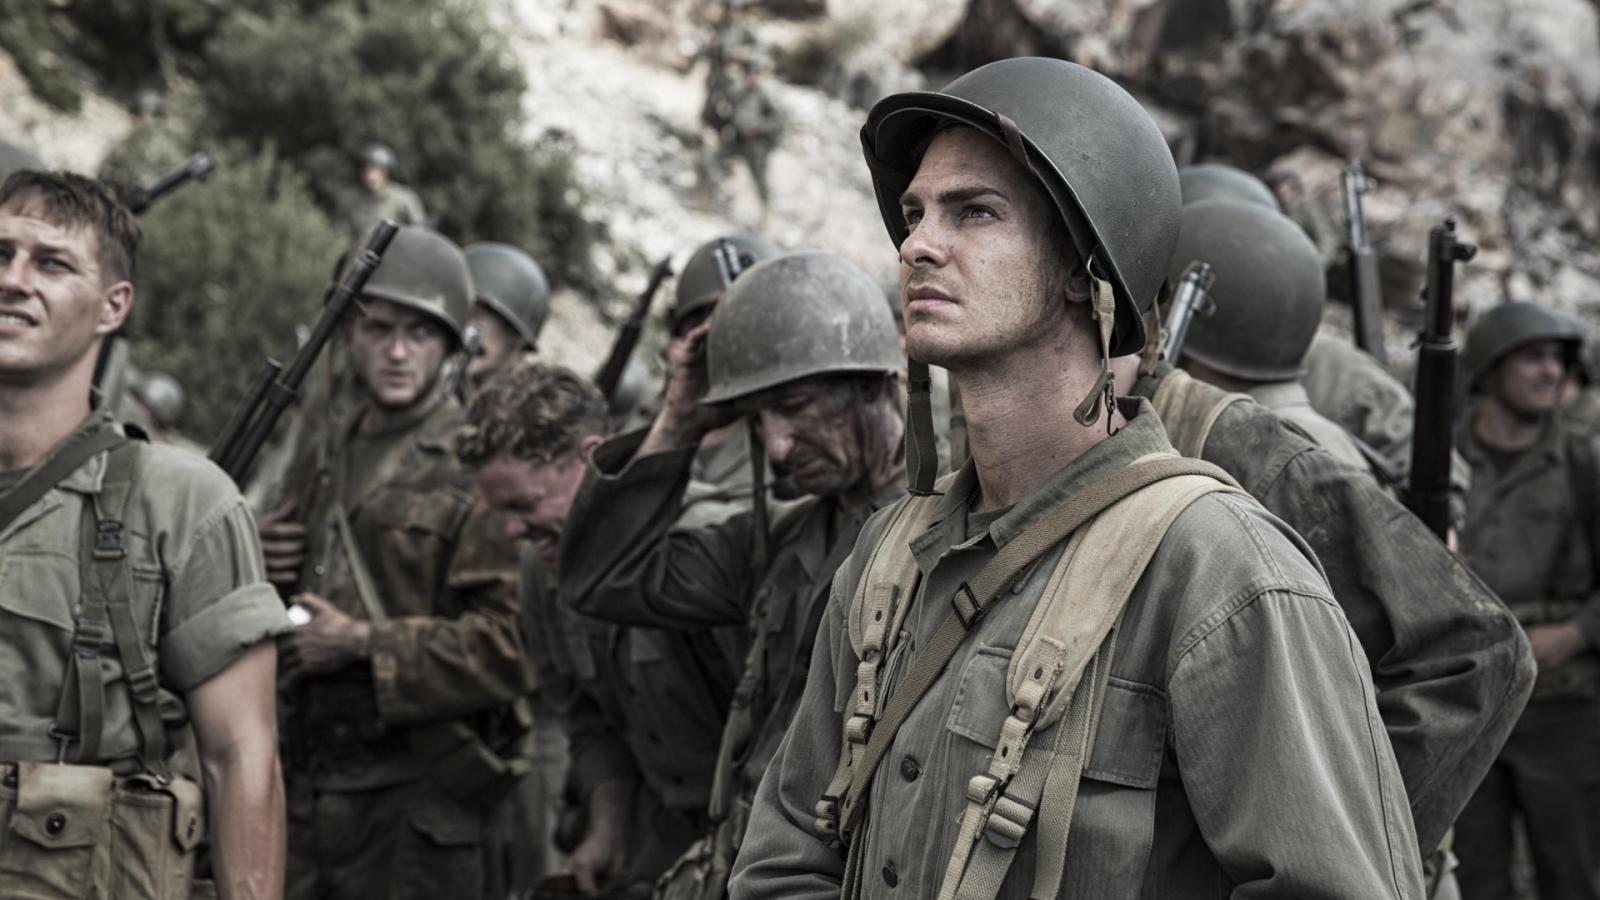 15 War Films with Storylines as Powerful as Saving Private Ryan - image 4